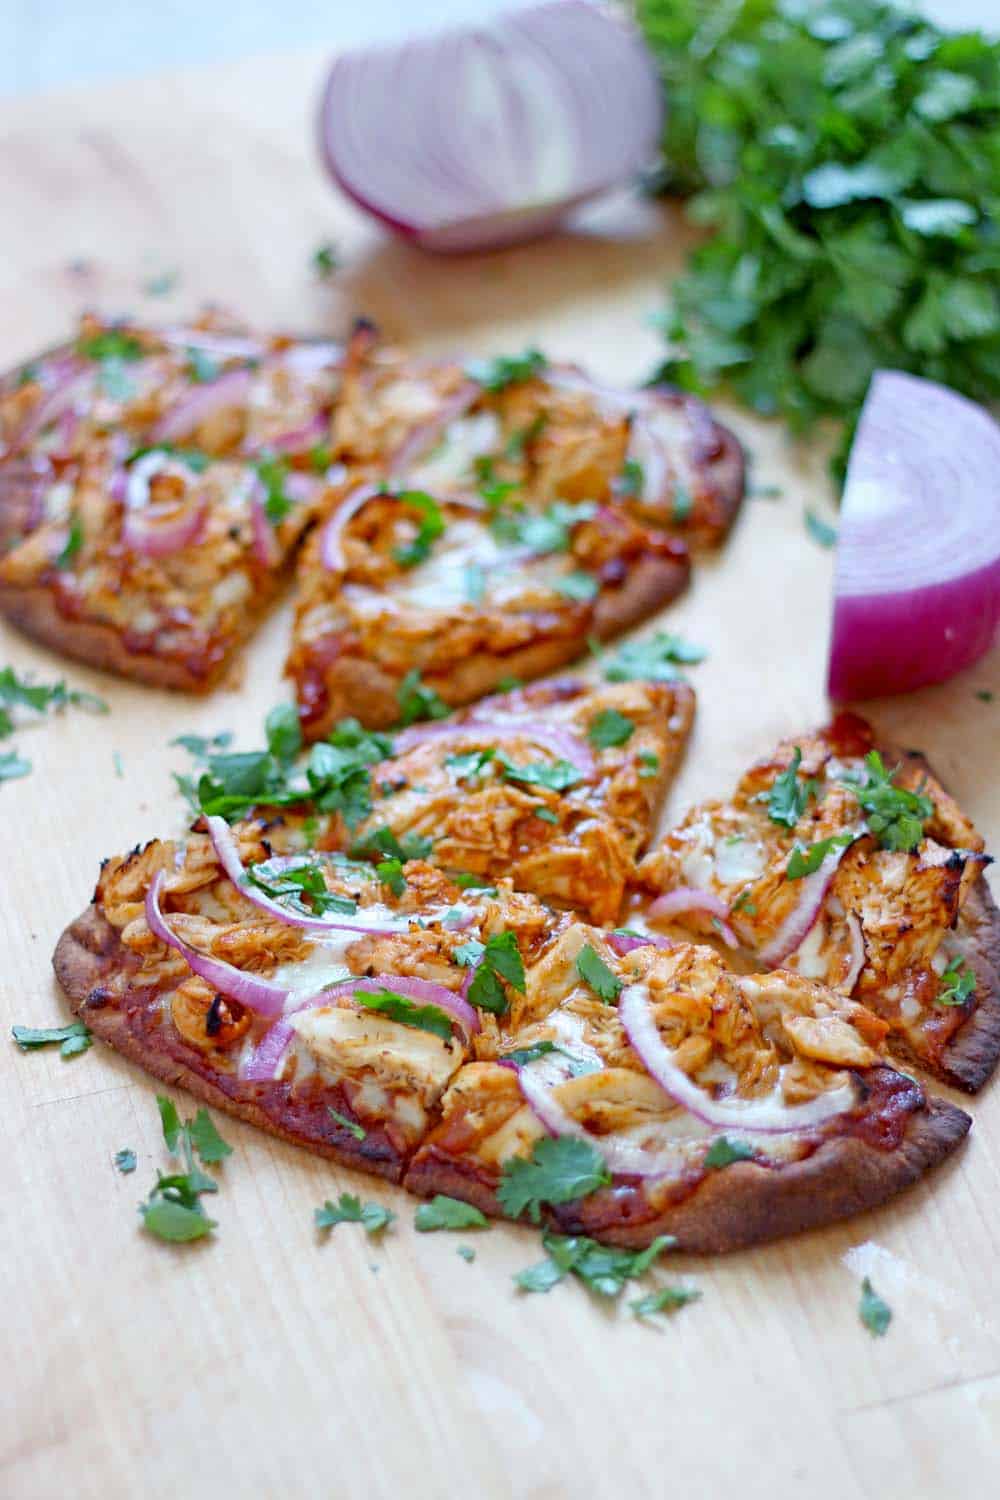 Two BBQ Chicken Naan Pizzas on a wooden cutting board.